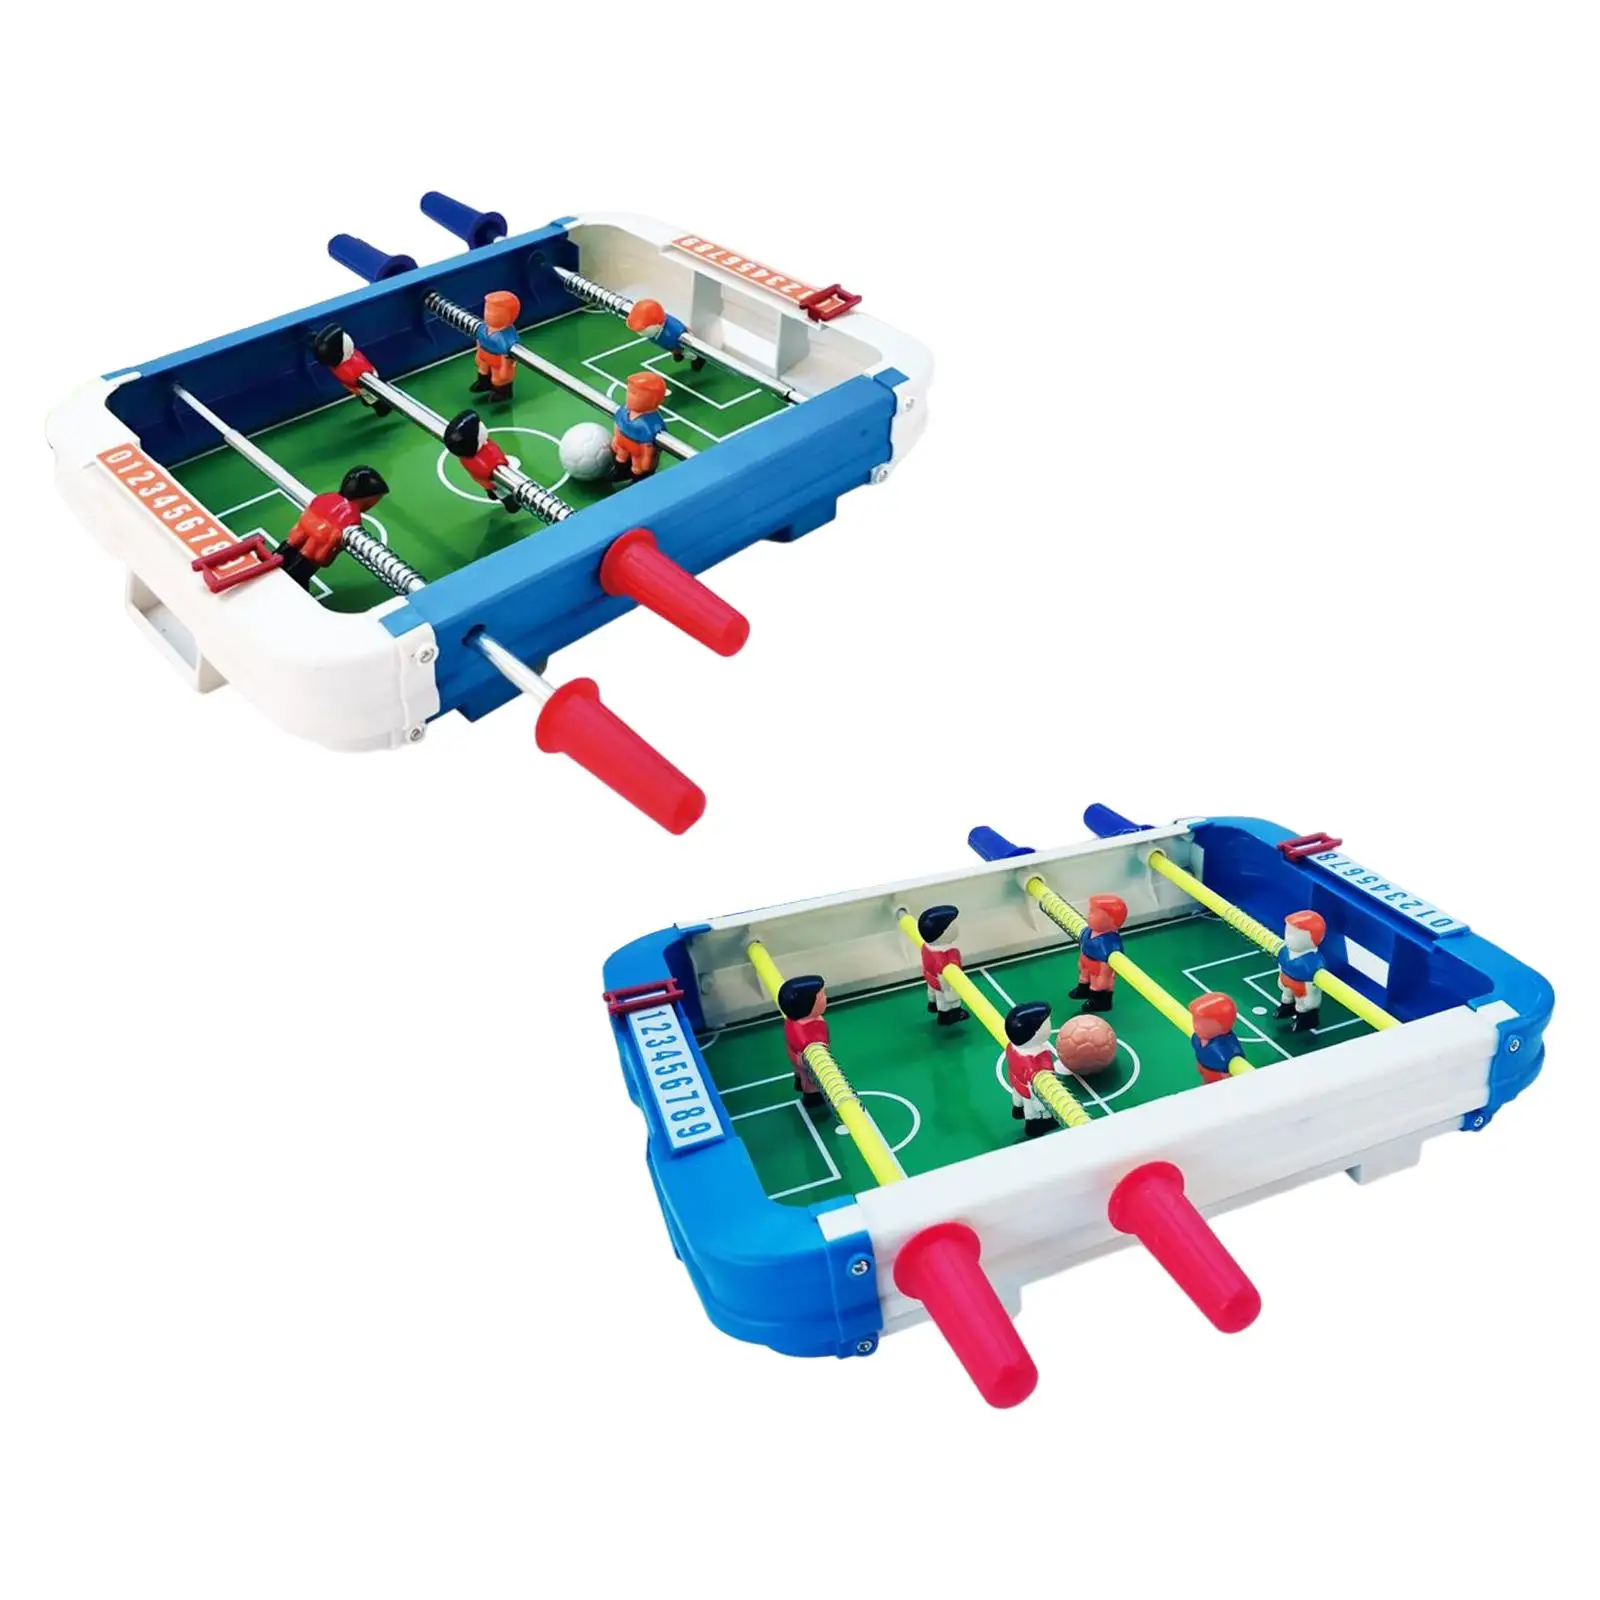 Foosball Table Football Game Desktop Sport Board for Holiday Gifts